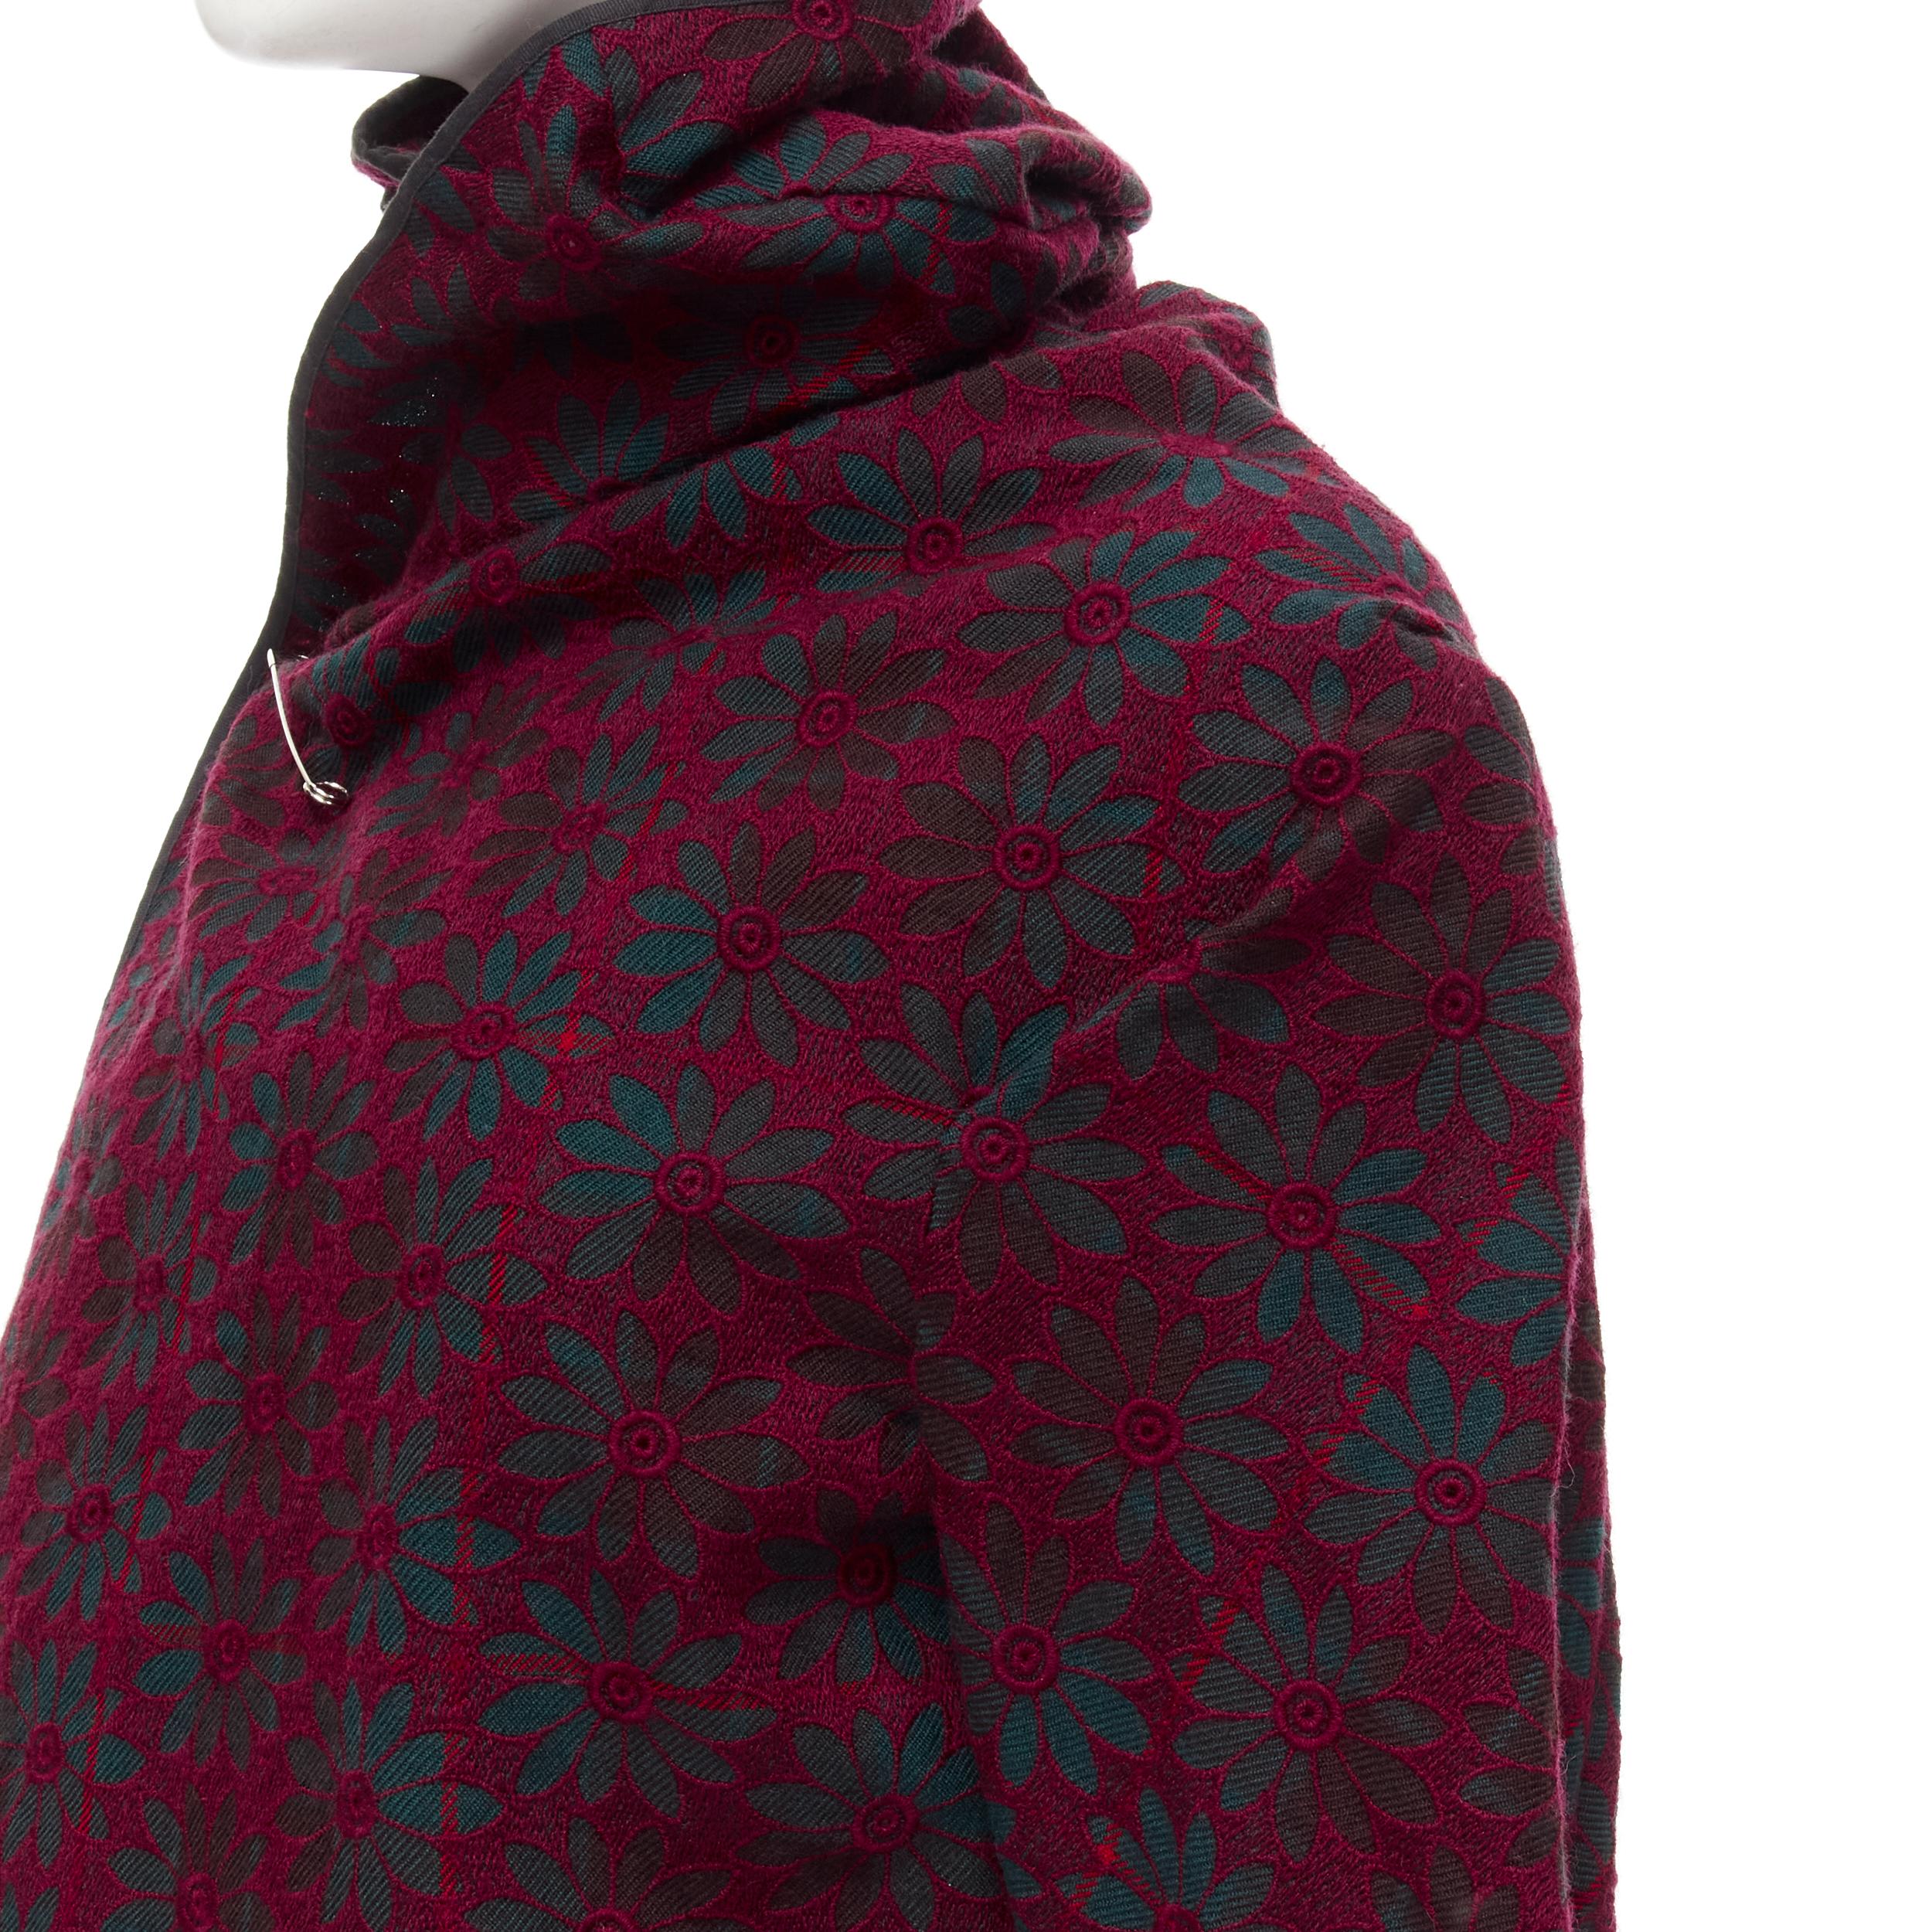 COMME DES GARCONS green plaid burgundy floral embroidery wrap jacket S 
Reference: CRTI/A00502 
Brand: Comme Des Garcons 
Designer: Rei Kawakubo 
Material: Wool 
Color: Red 
Pattern: Floral 
Extra Detail: Self wrap front- metal safety pin not